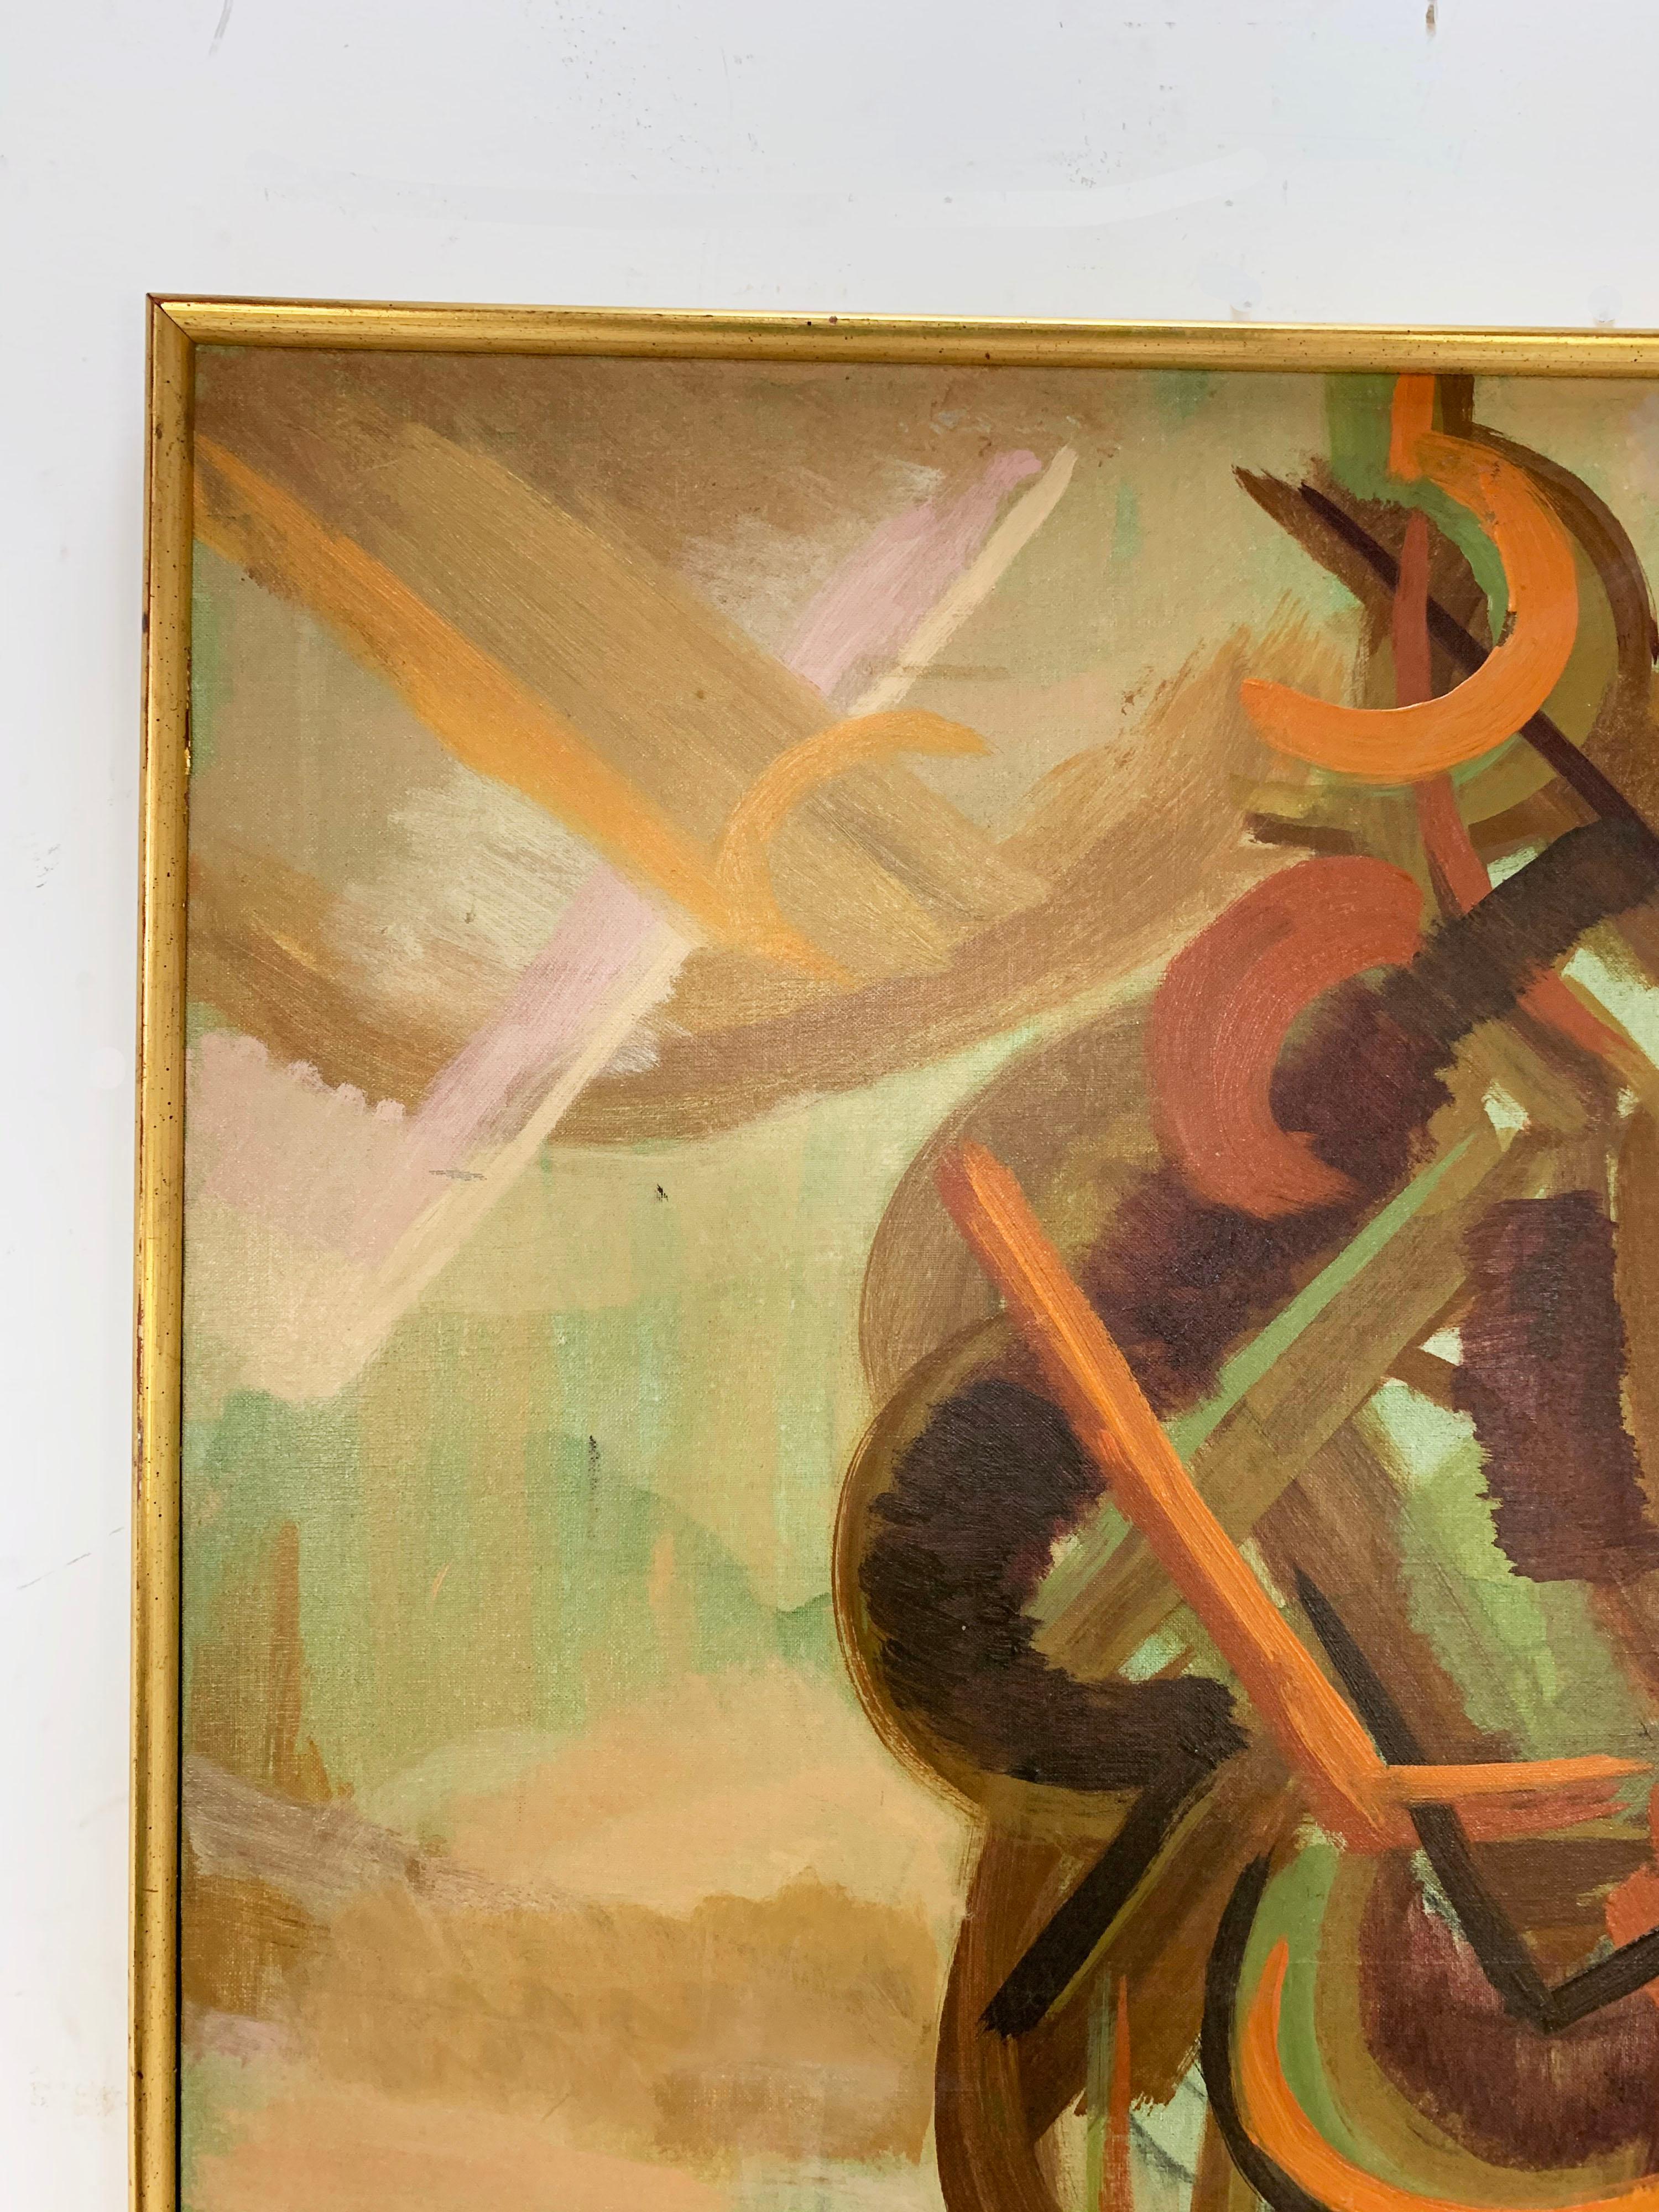 American Abstract Symbolist Midcentury Oil Painting by Harold Mesibov, circa 1950s